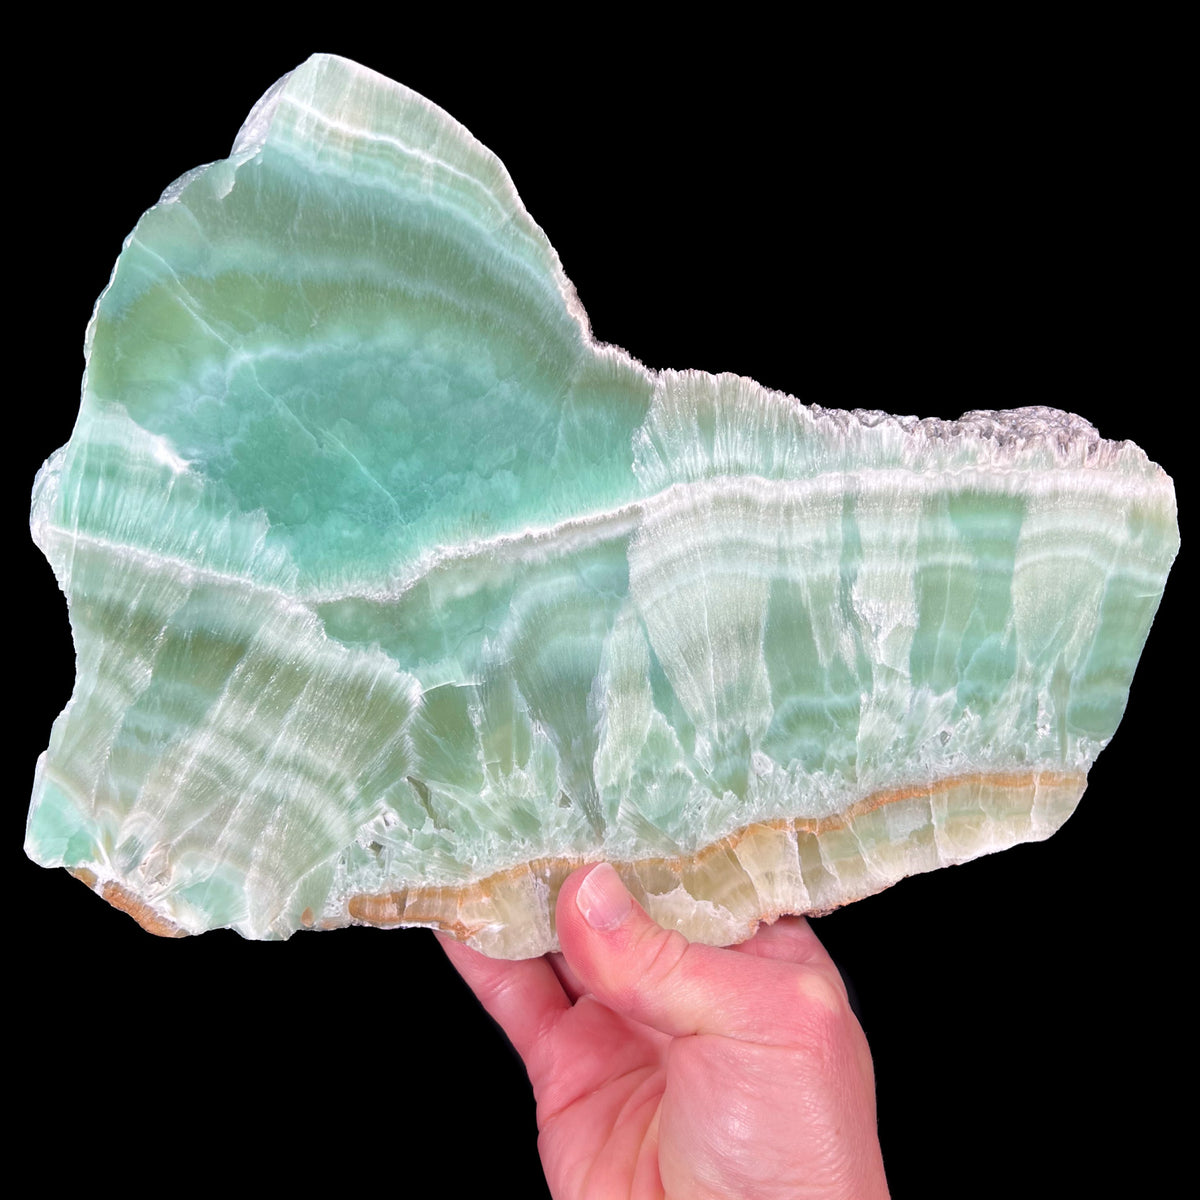 Copper-infused Green Aragonite Slice from Spain